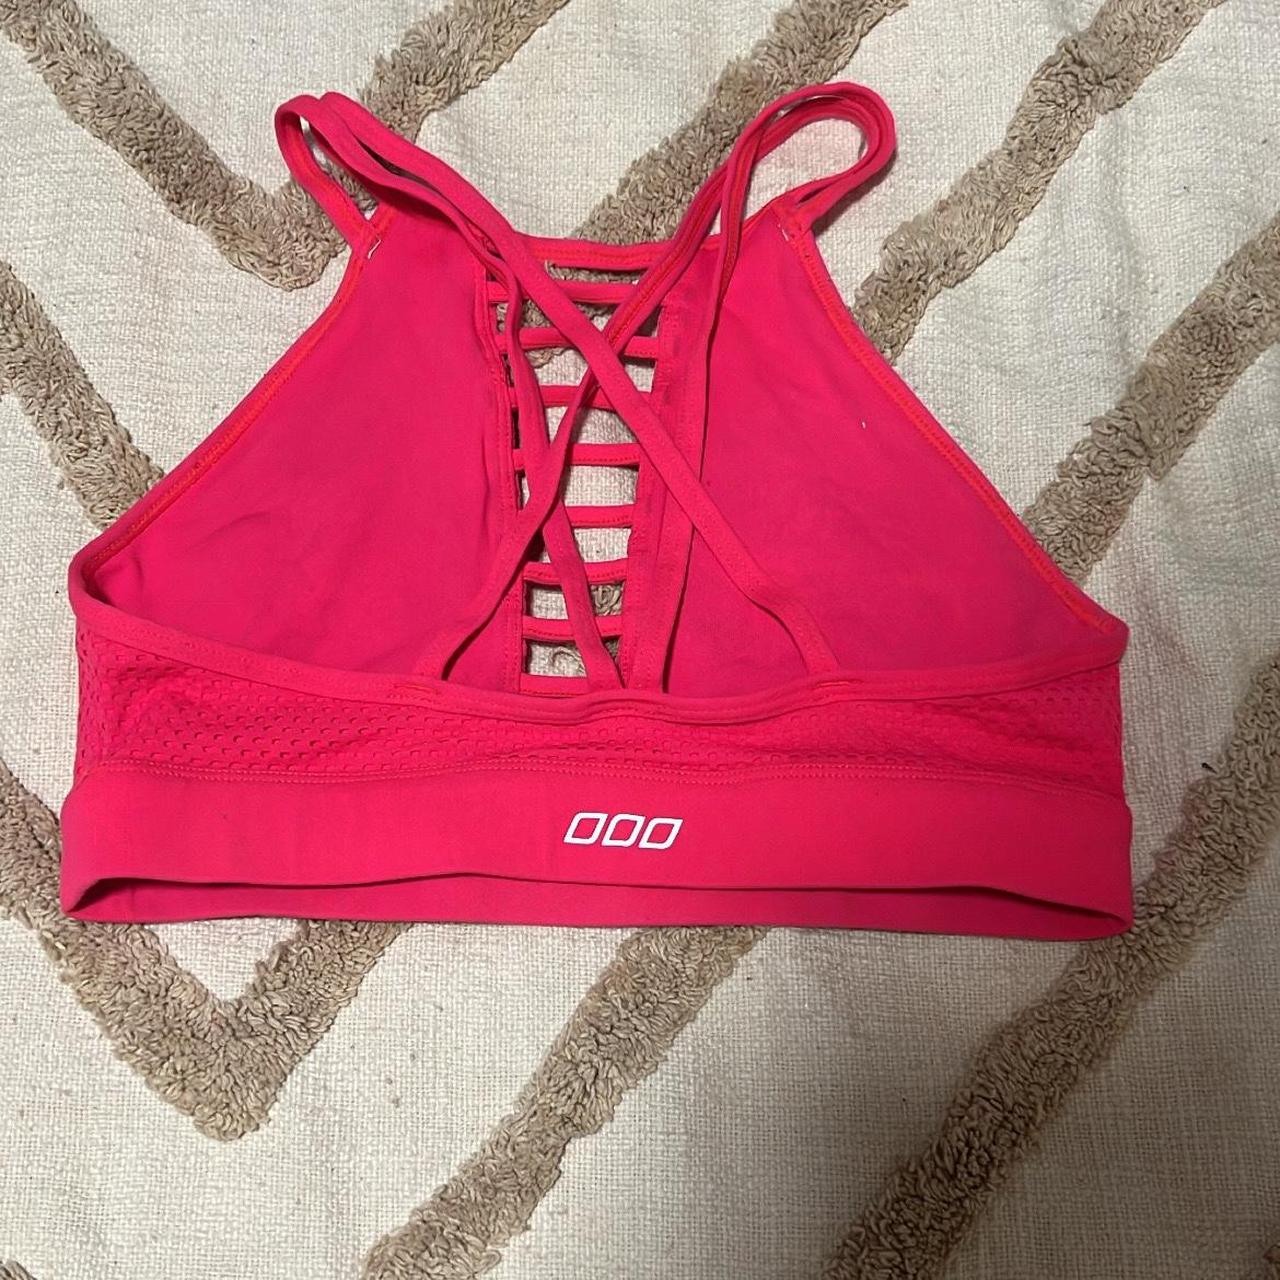 Lorna Jane sports bra. Would fit any cup size from D... - Depop